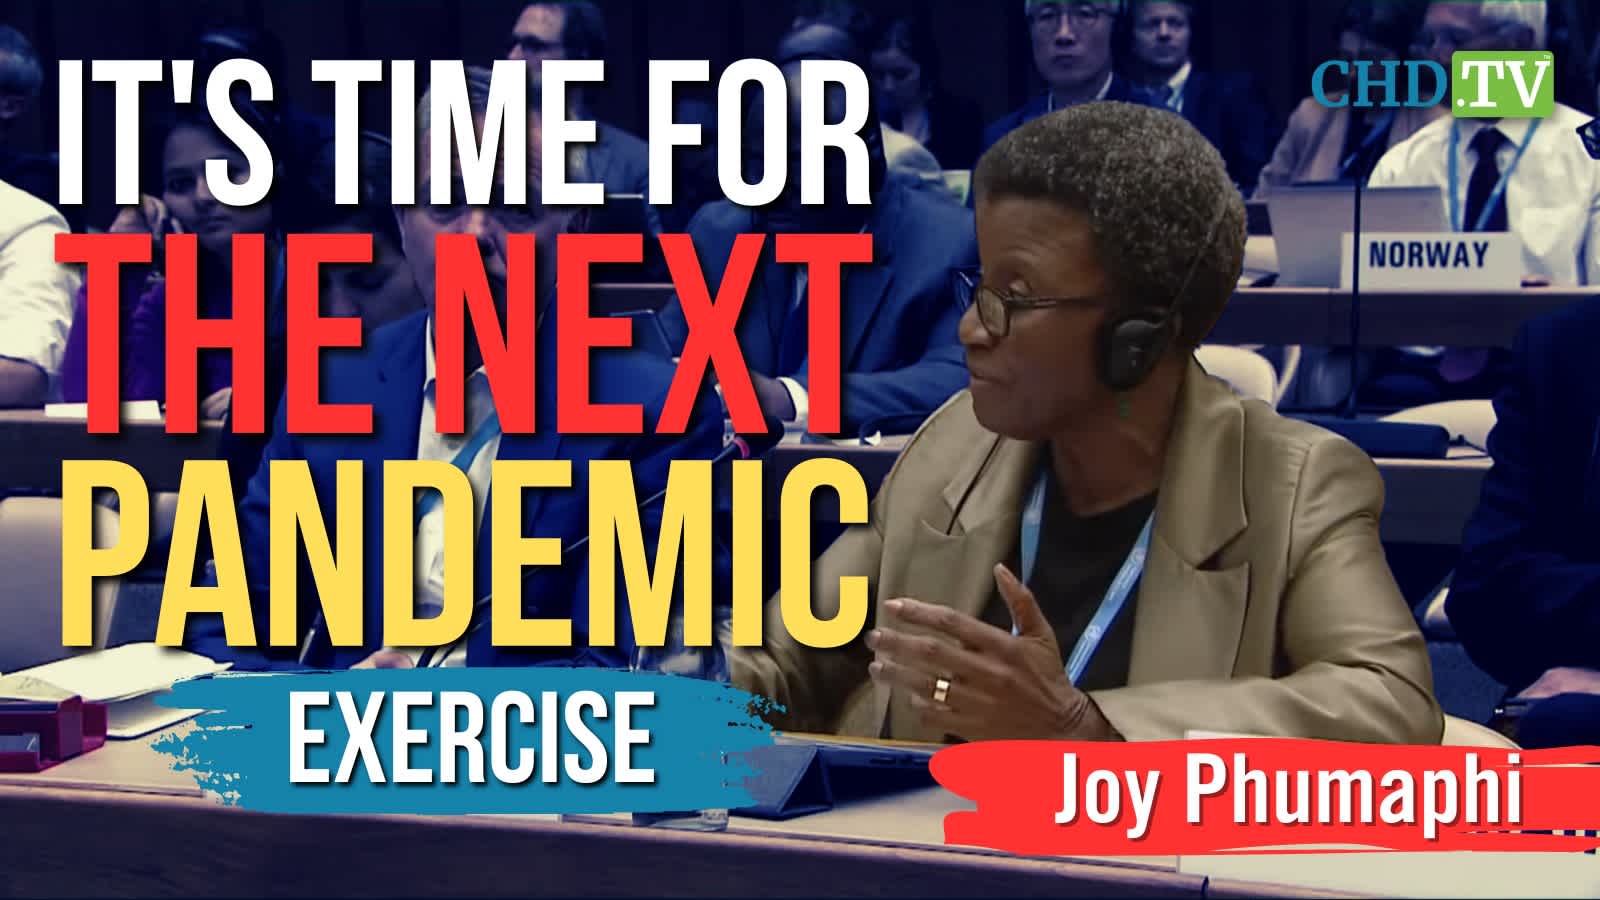 Here We Go Again? It’s Time for the NEXT PANDEMIC Exercise, Says GPMD Co-Chair Joy Phumaphi